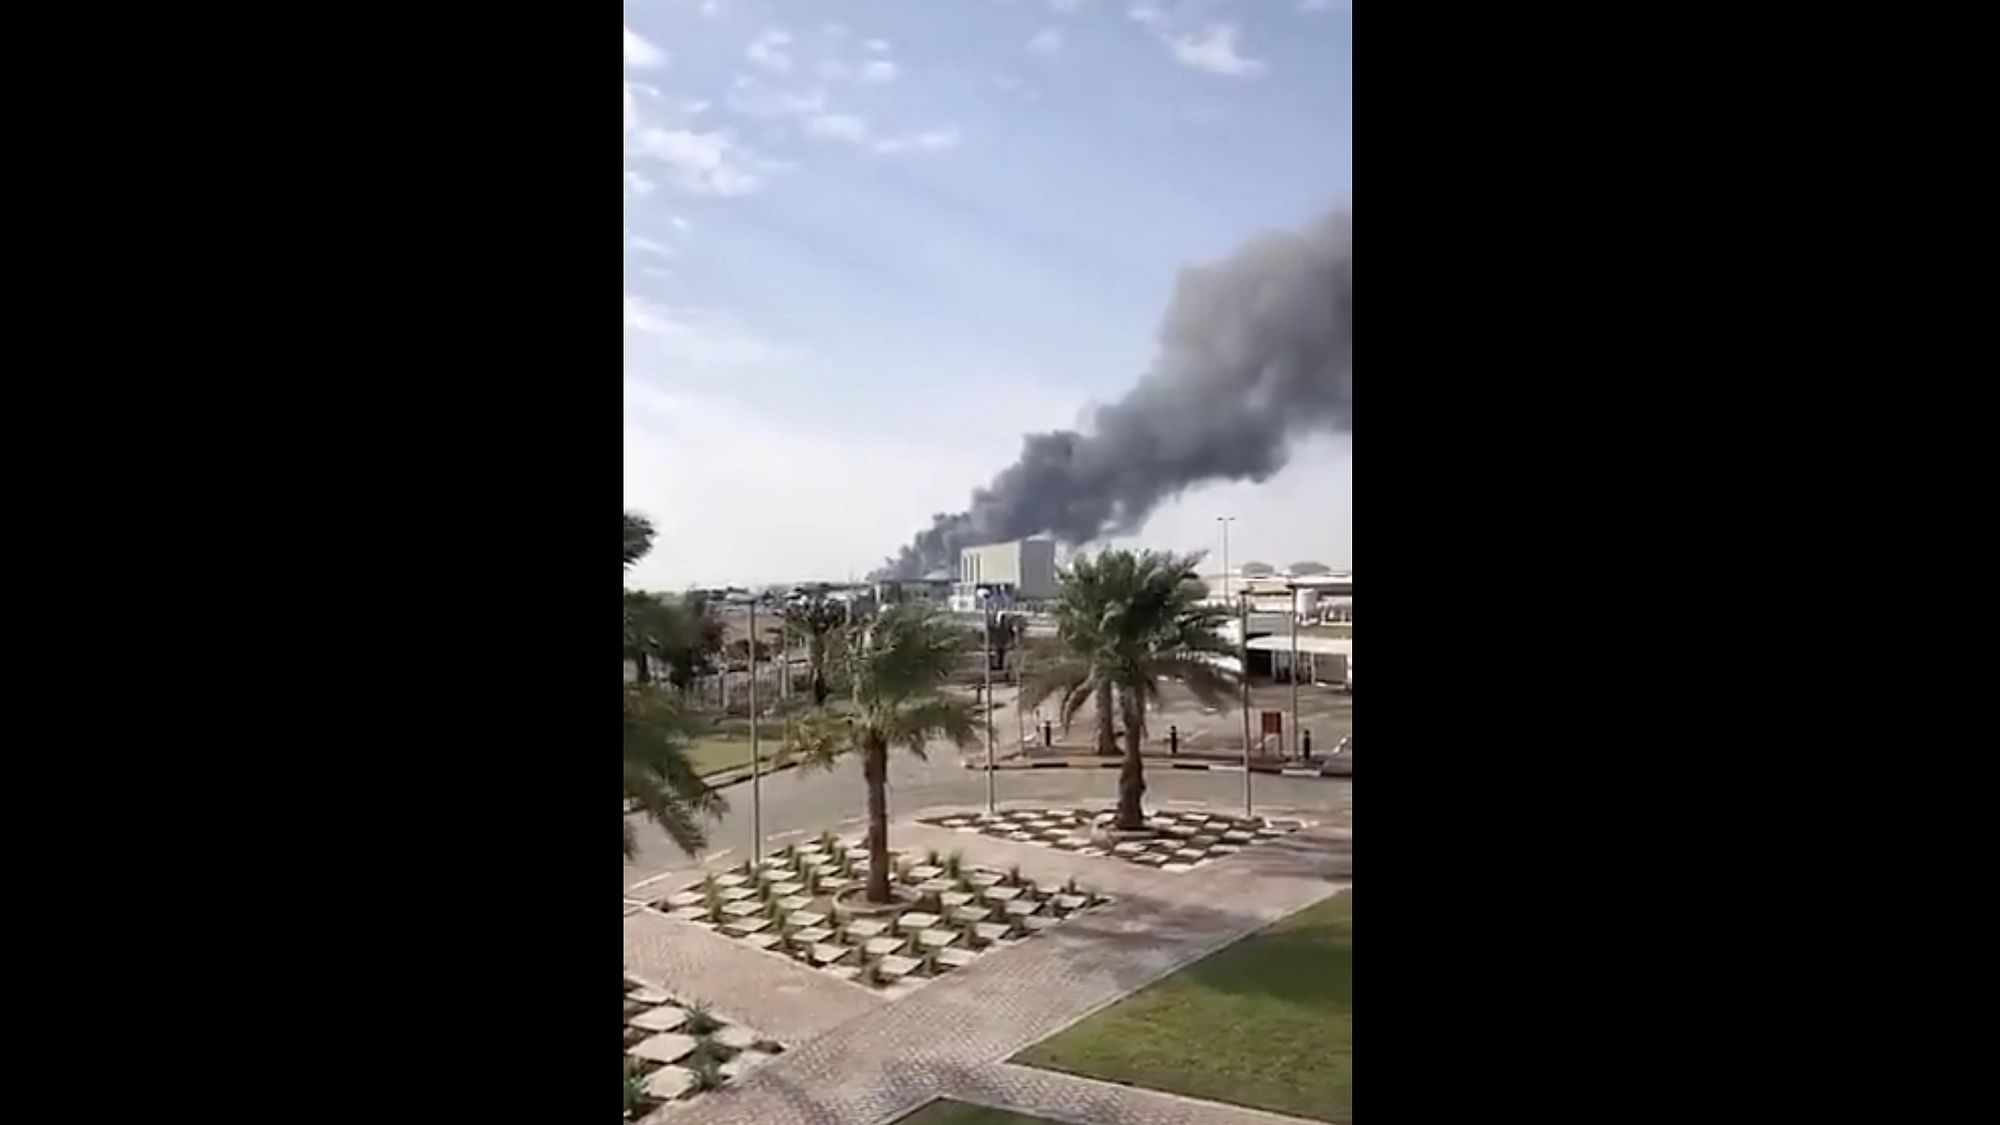 <div class="paragraphs"><p>3 fuel trucks have exploded near Abu Dhabi airport, killing 3 people.&nbsp;</p></div>